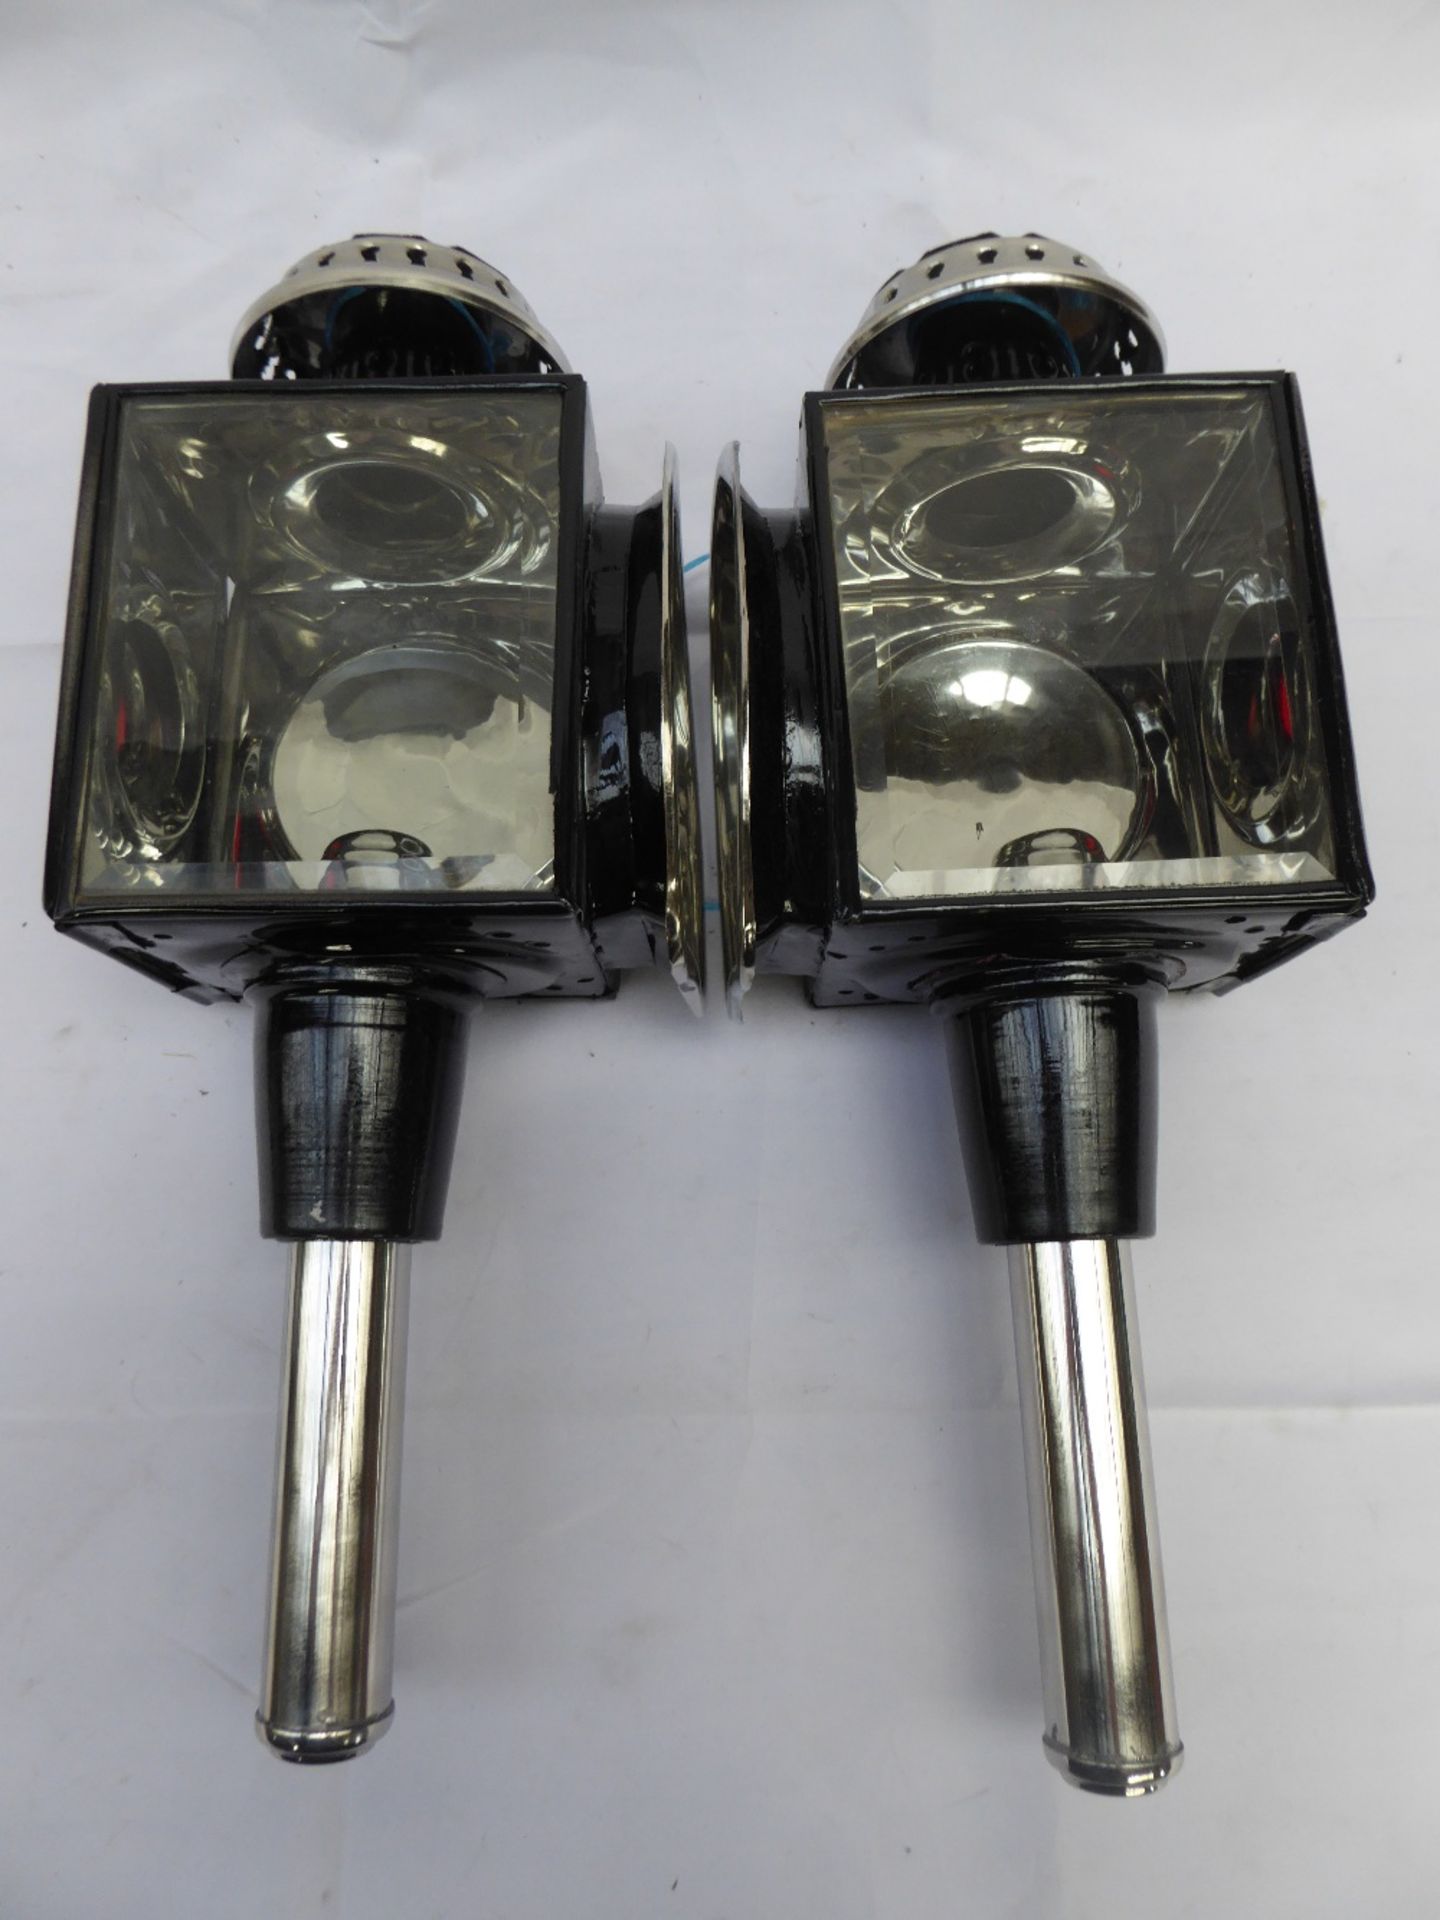 Pair of whitemetal carriage lamps with horseshoe fronts - carries VAT - Image 2 of 2